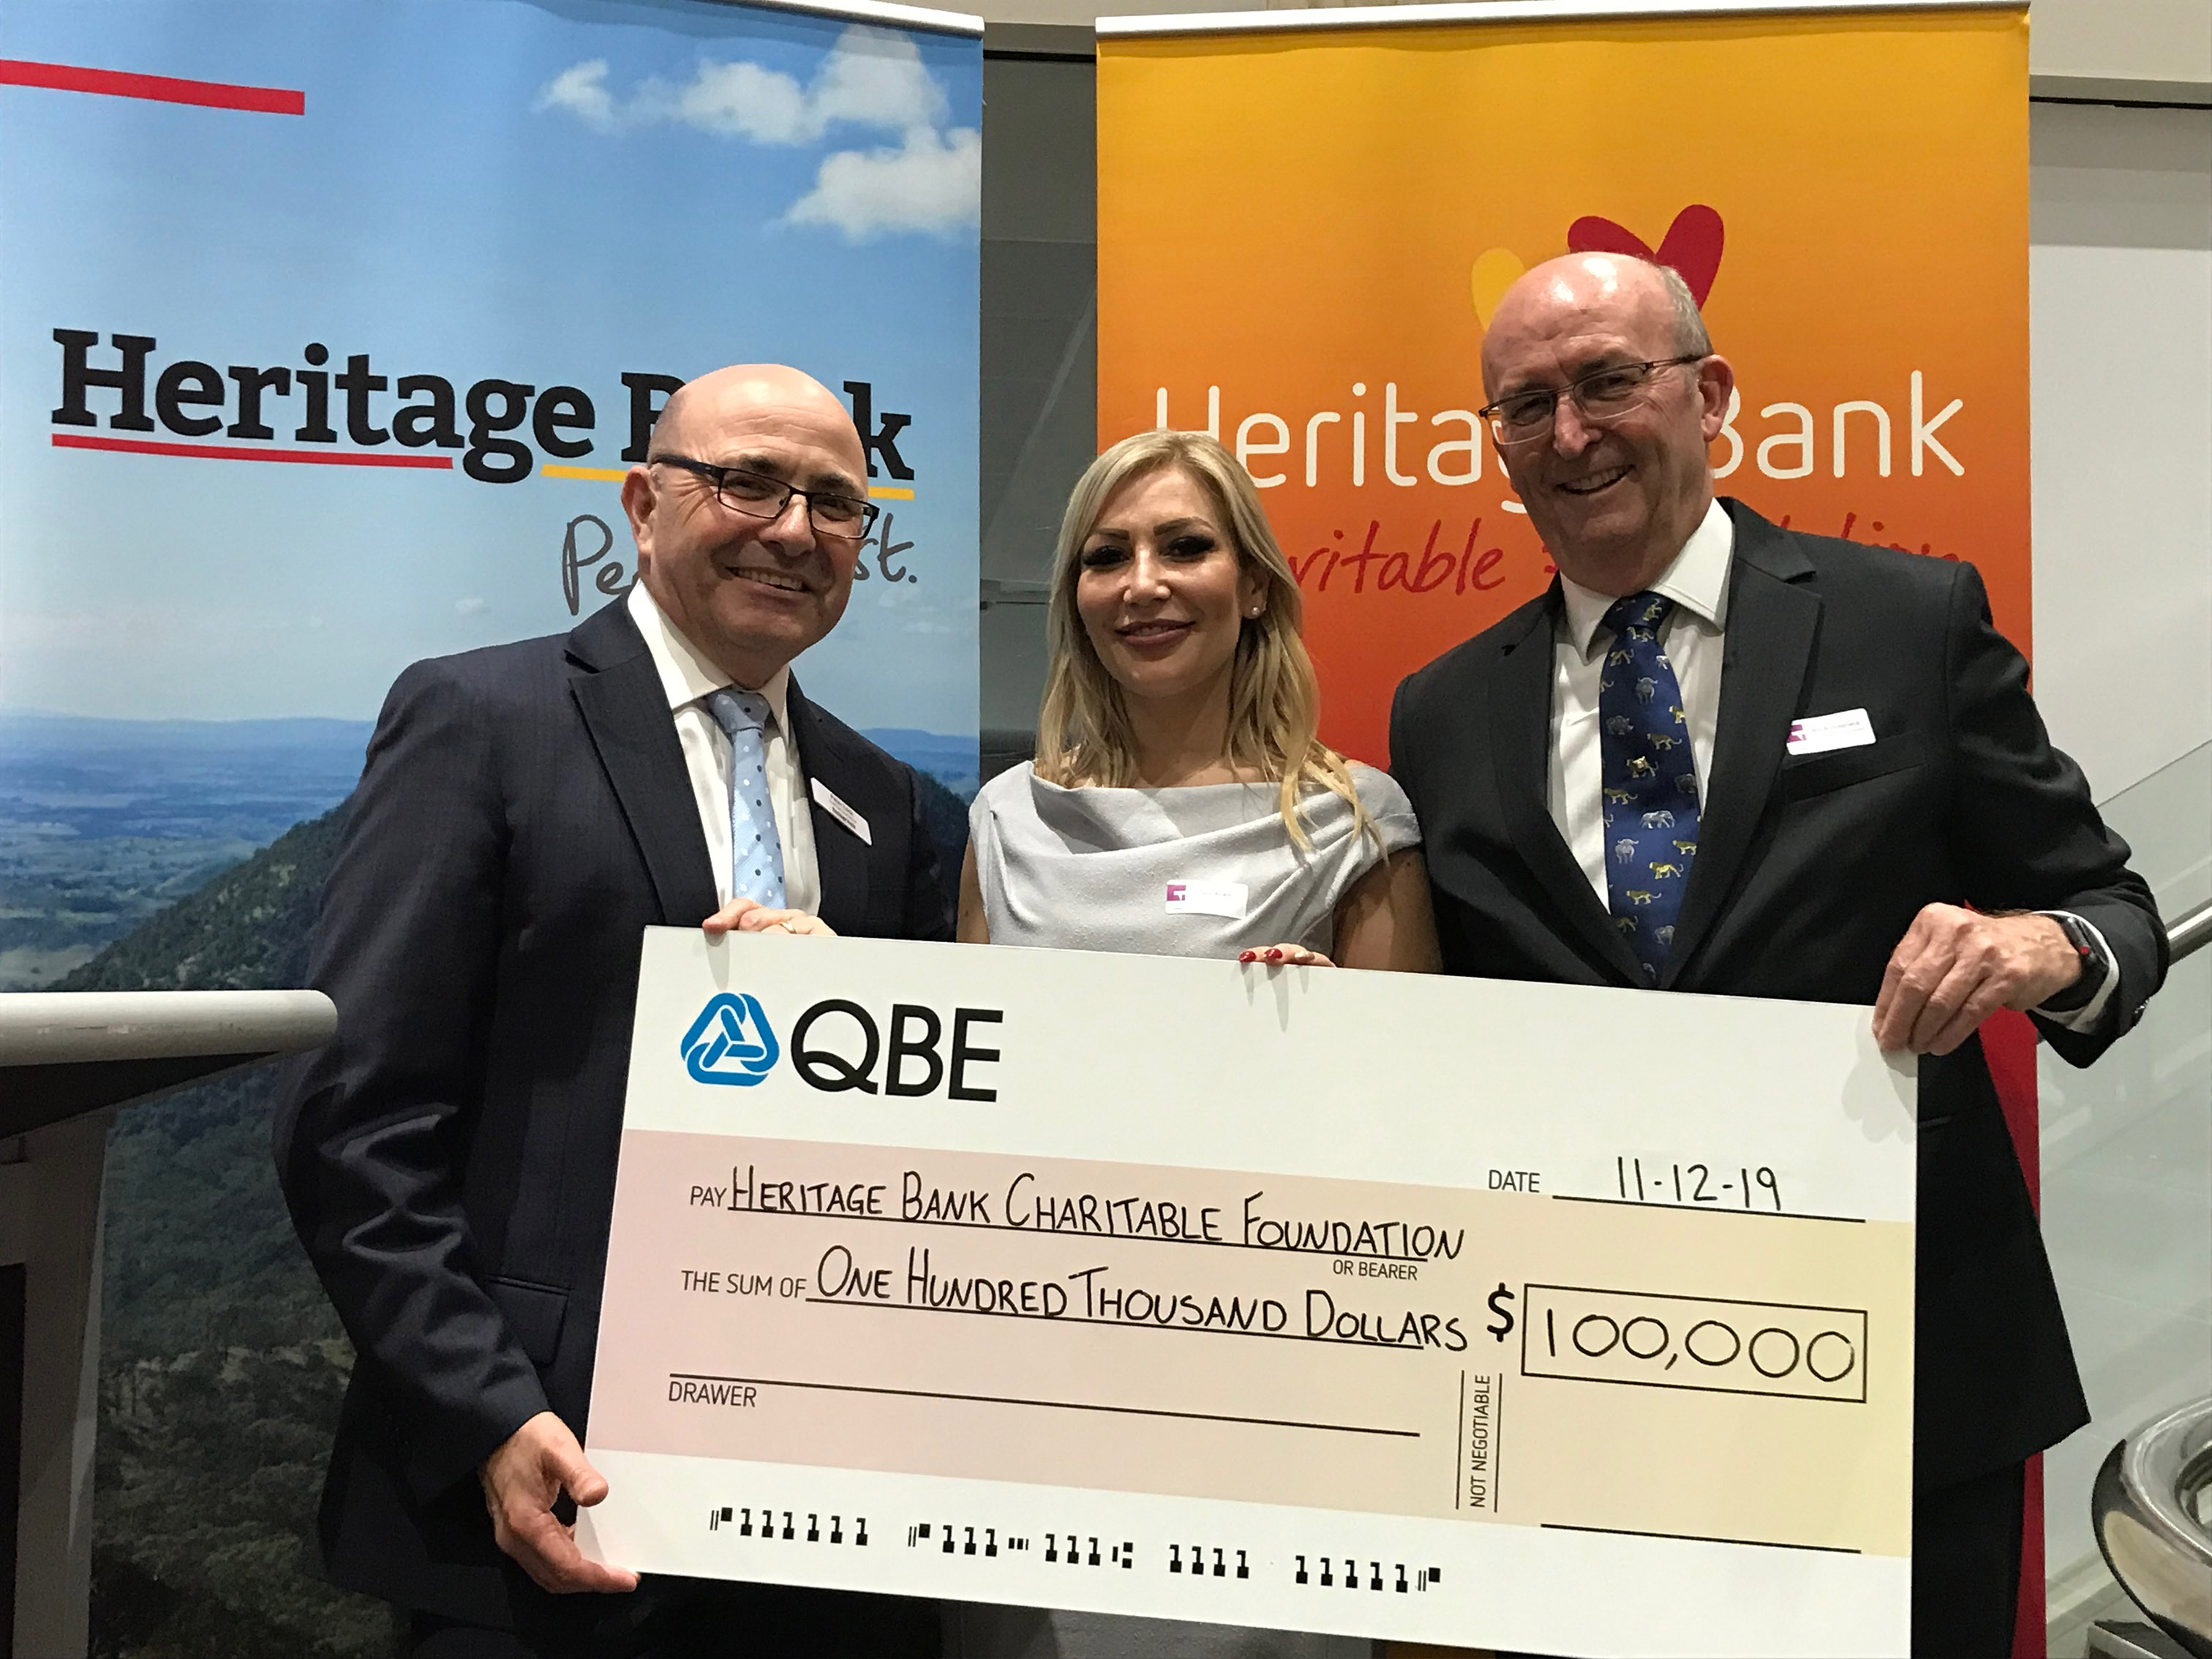 QBE supports the Heritage Bank Charitable Foundation